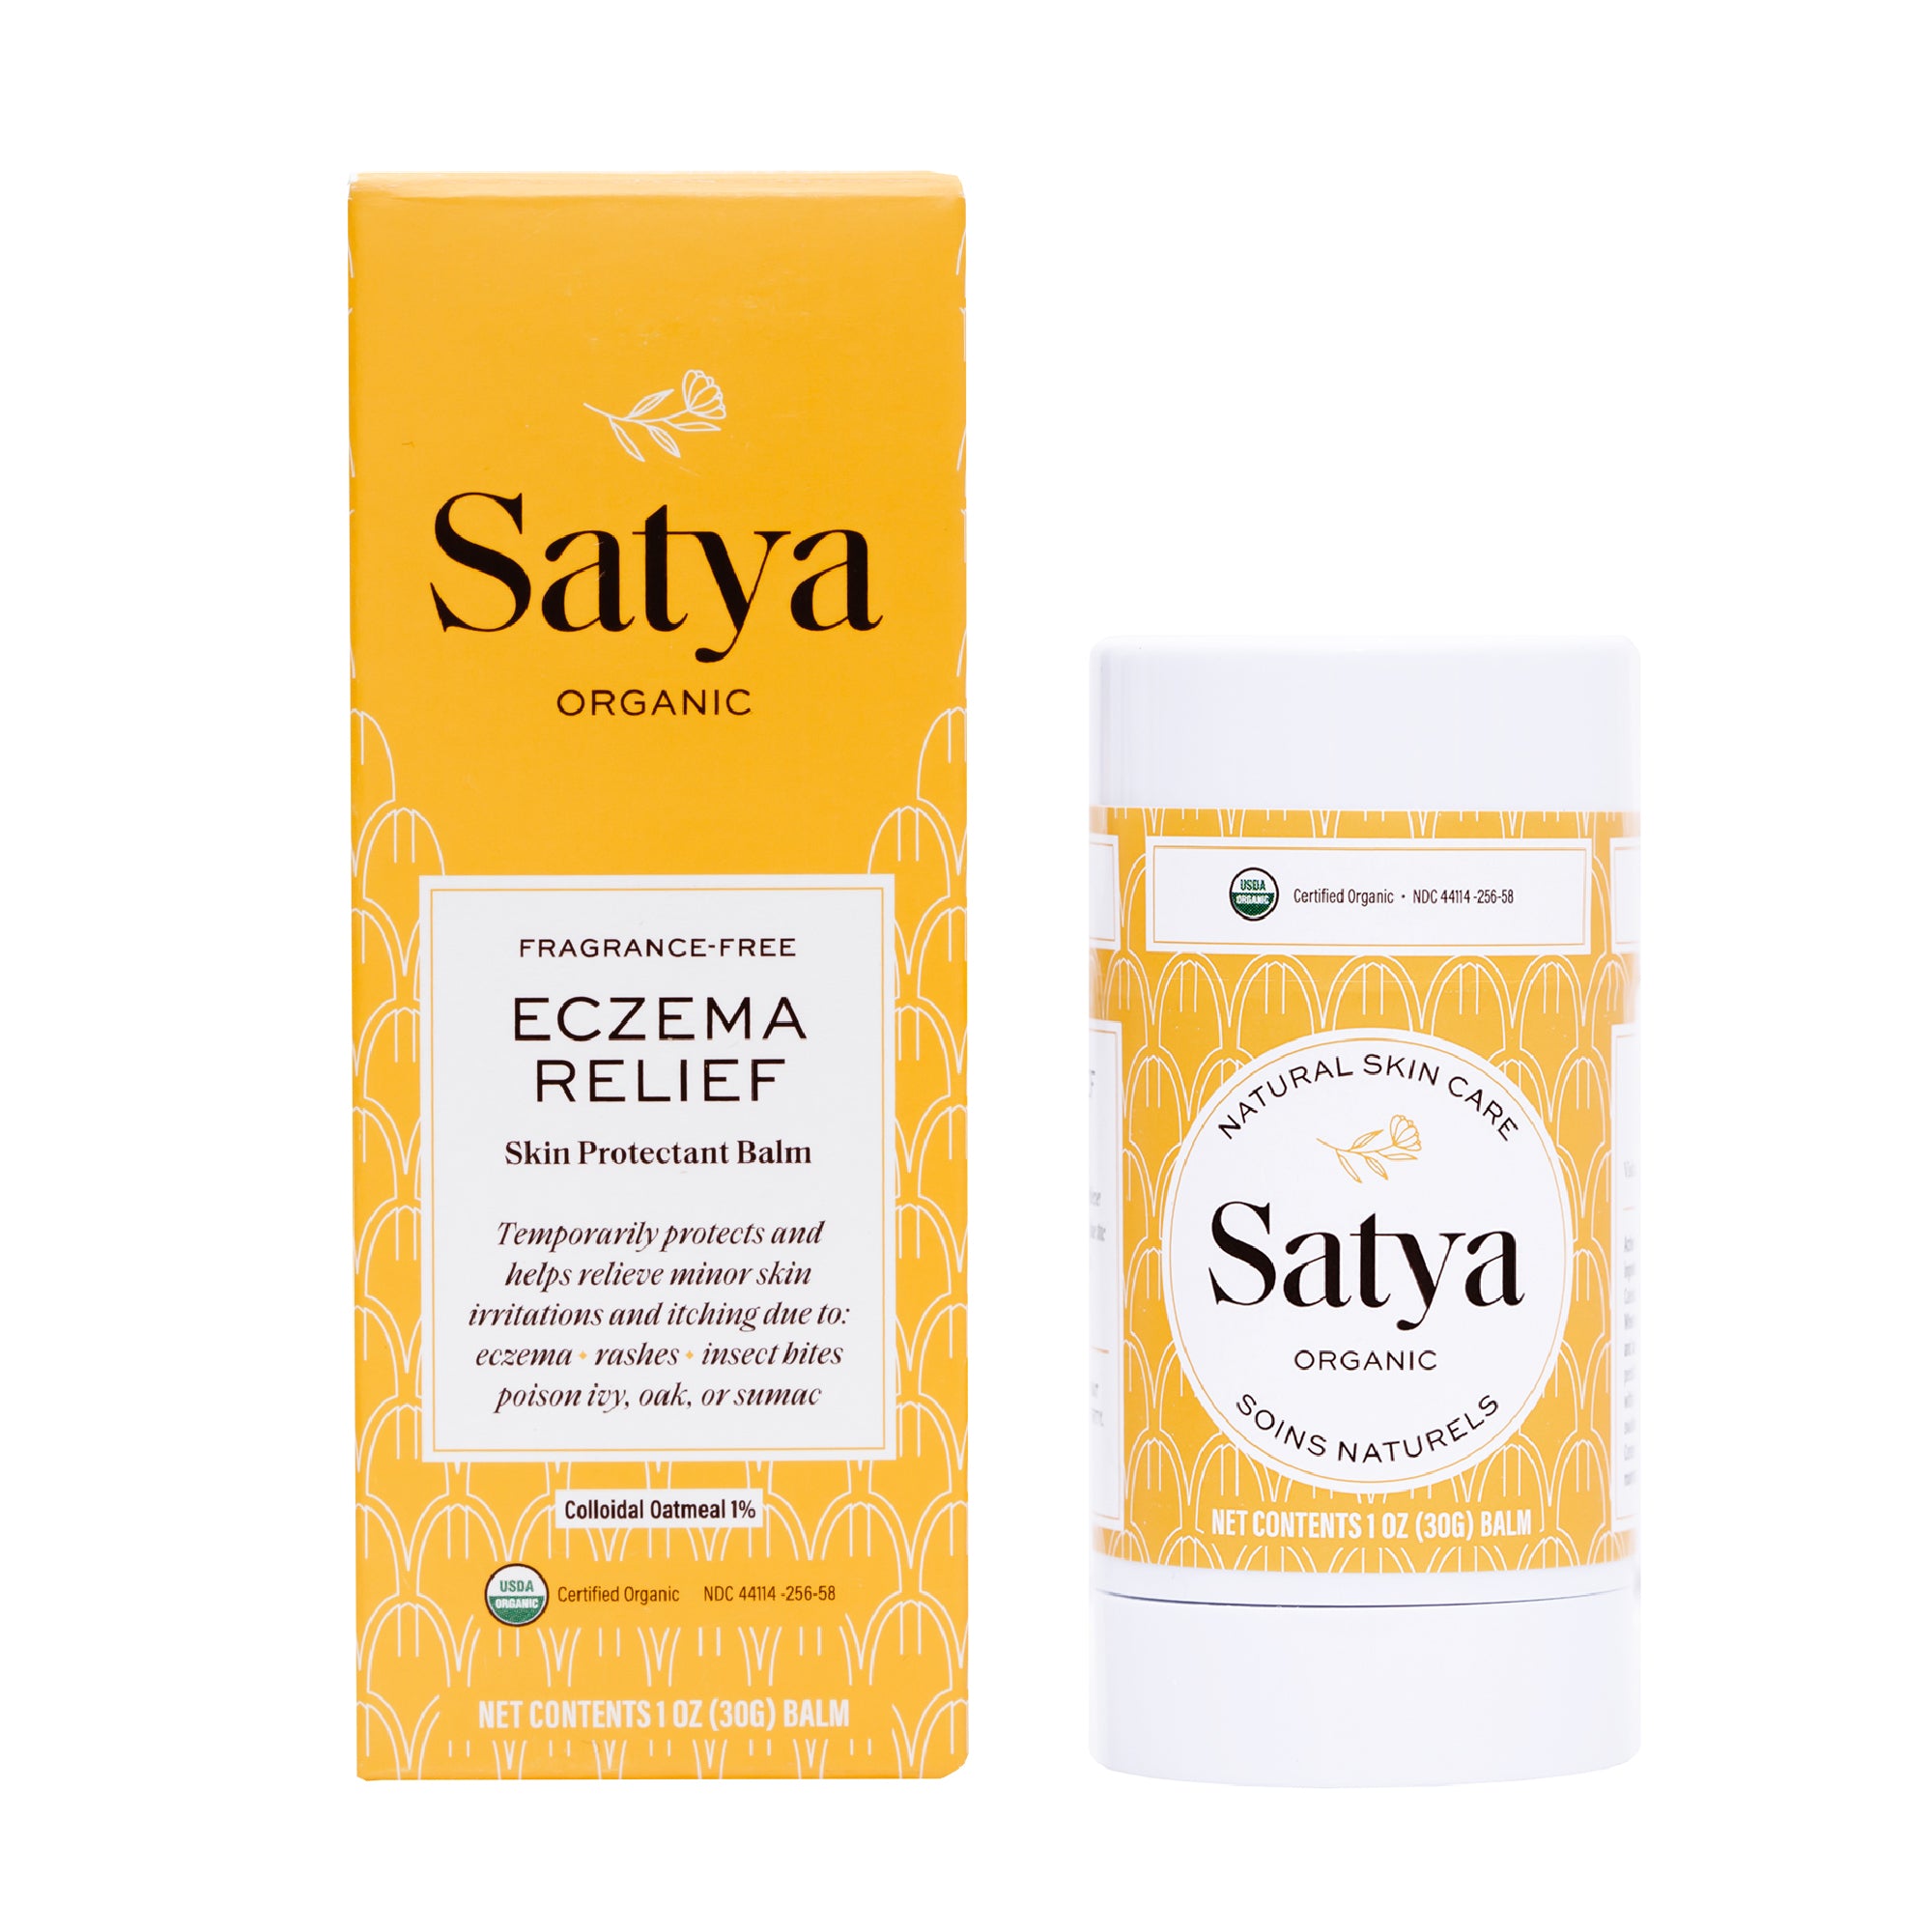 Fragrance free. Eczema Relief. Relieves itching and skin irritations.